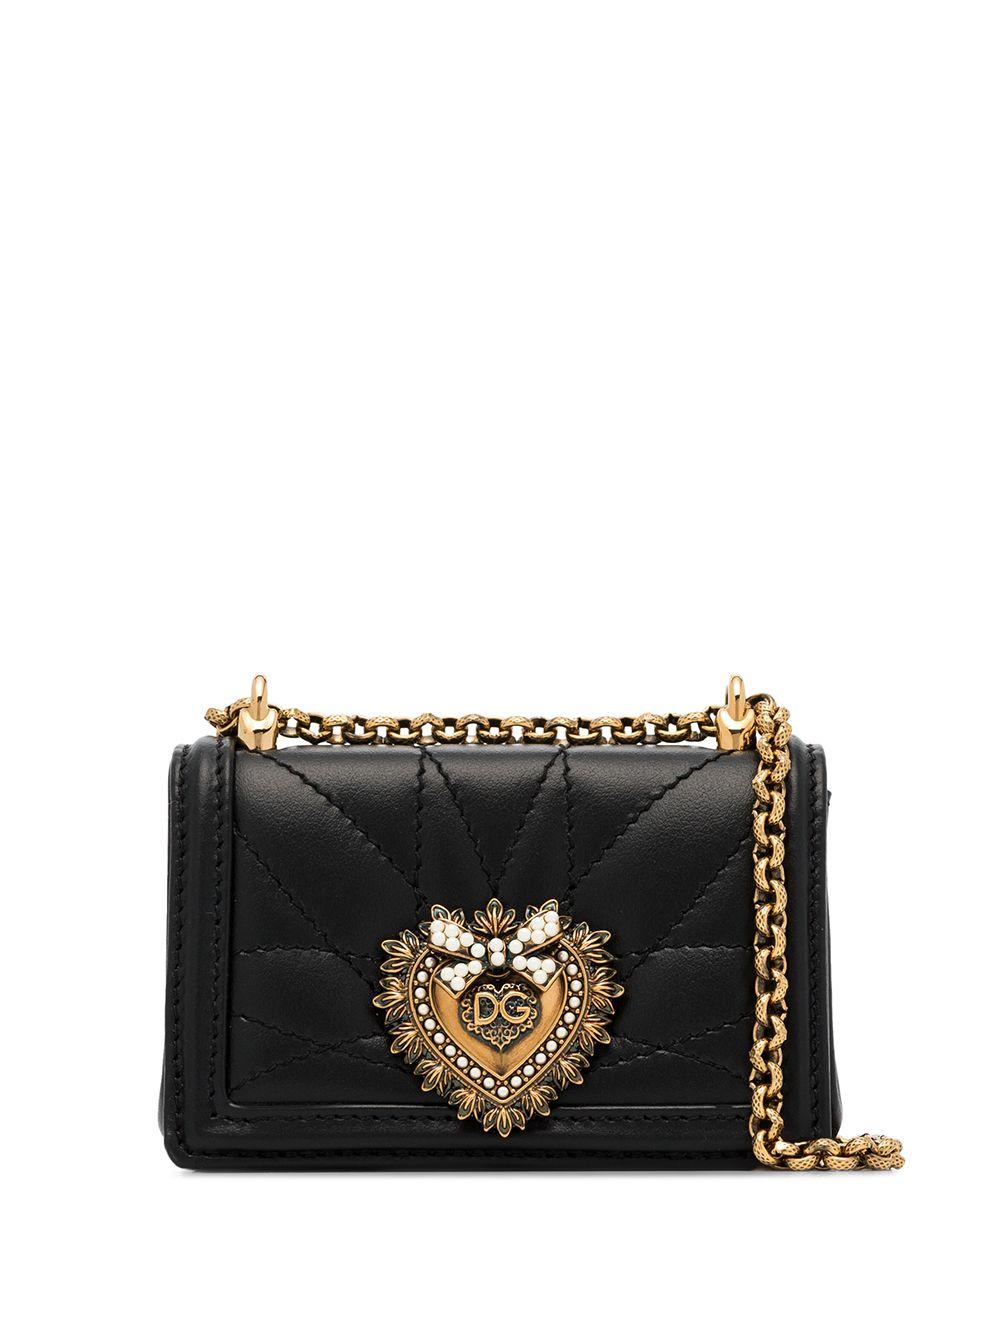 Dolce & Gabbana Large Devotion Bag - More Than You Can Imagine